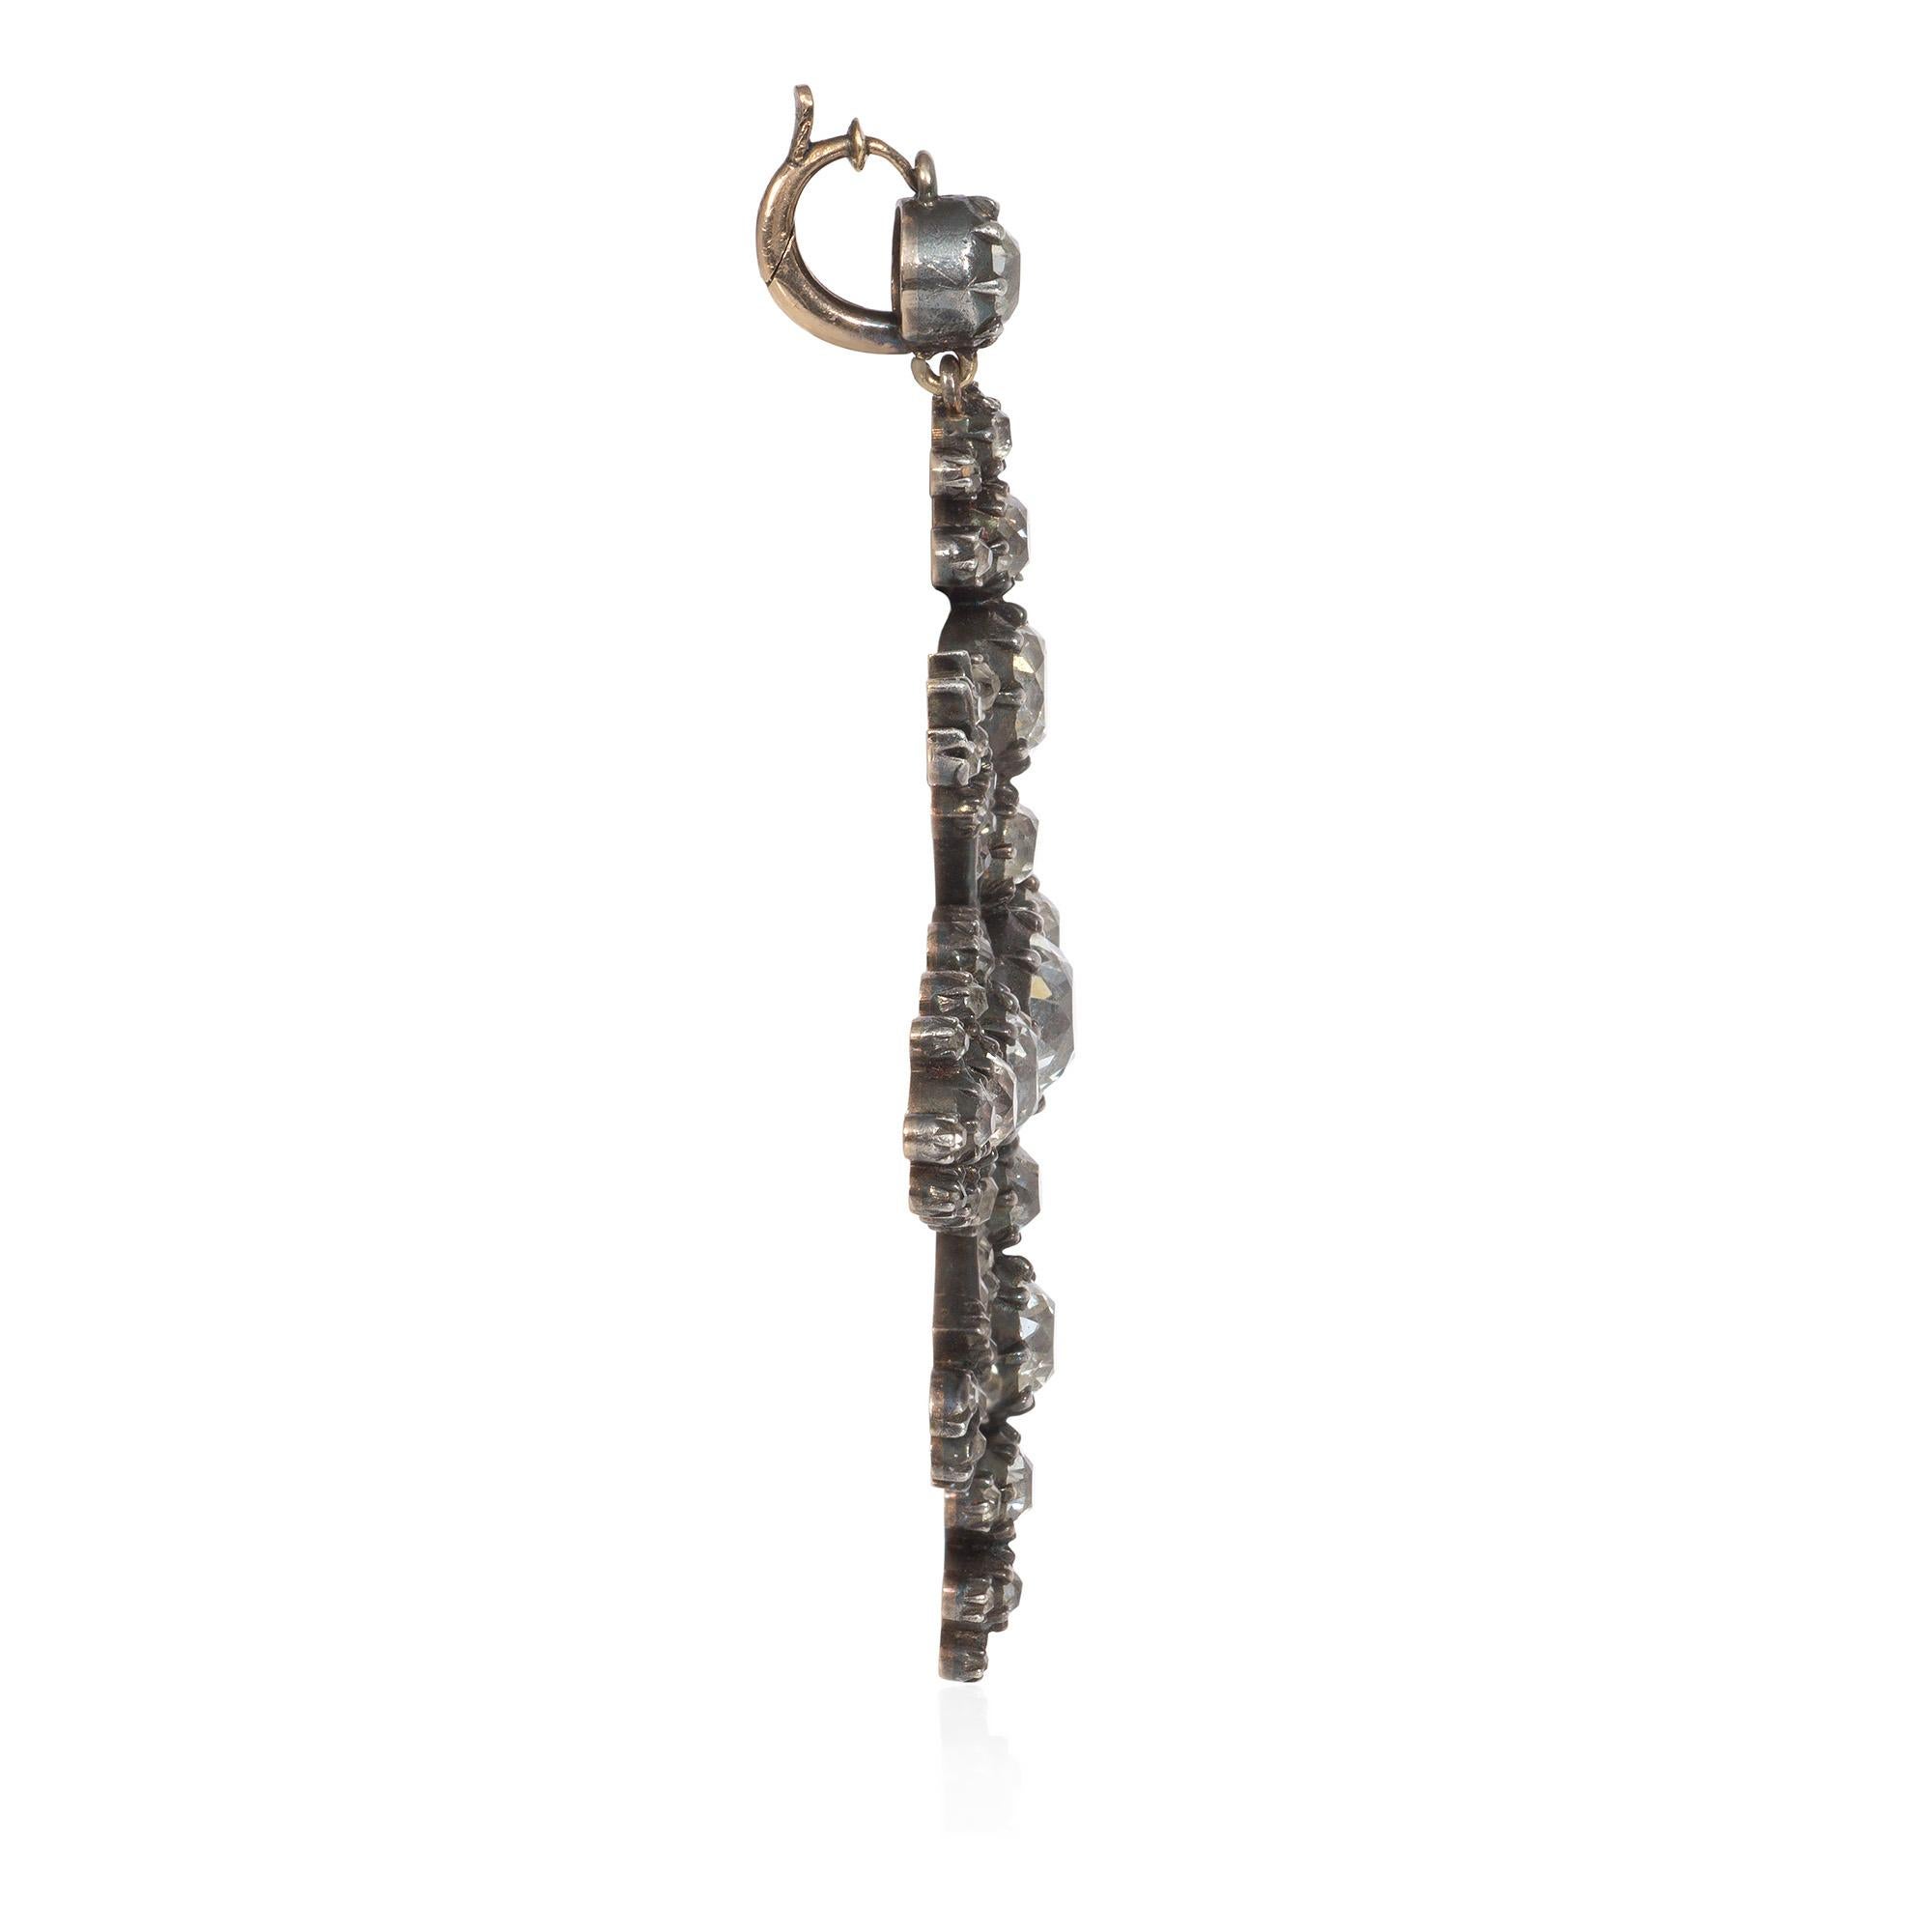 An antique Victorian period diamond pendant in silver-topped gold, set with old mine cut diamonds in the form of a starburst with torchière motifs on the diagonal axes, in sterling silver and 18k.  Atw diamonds 6.00 cts.  Pairs equally well with a